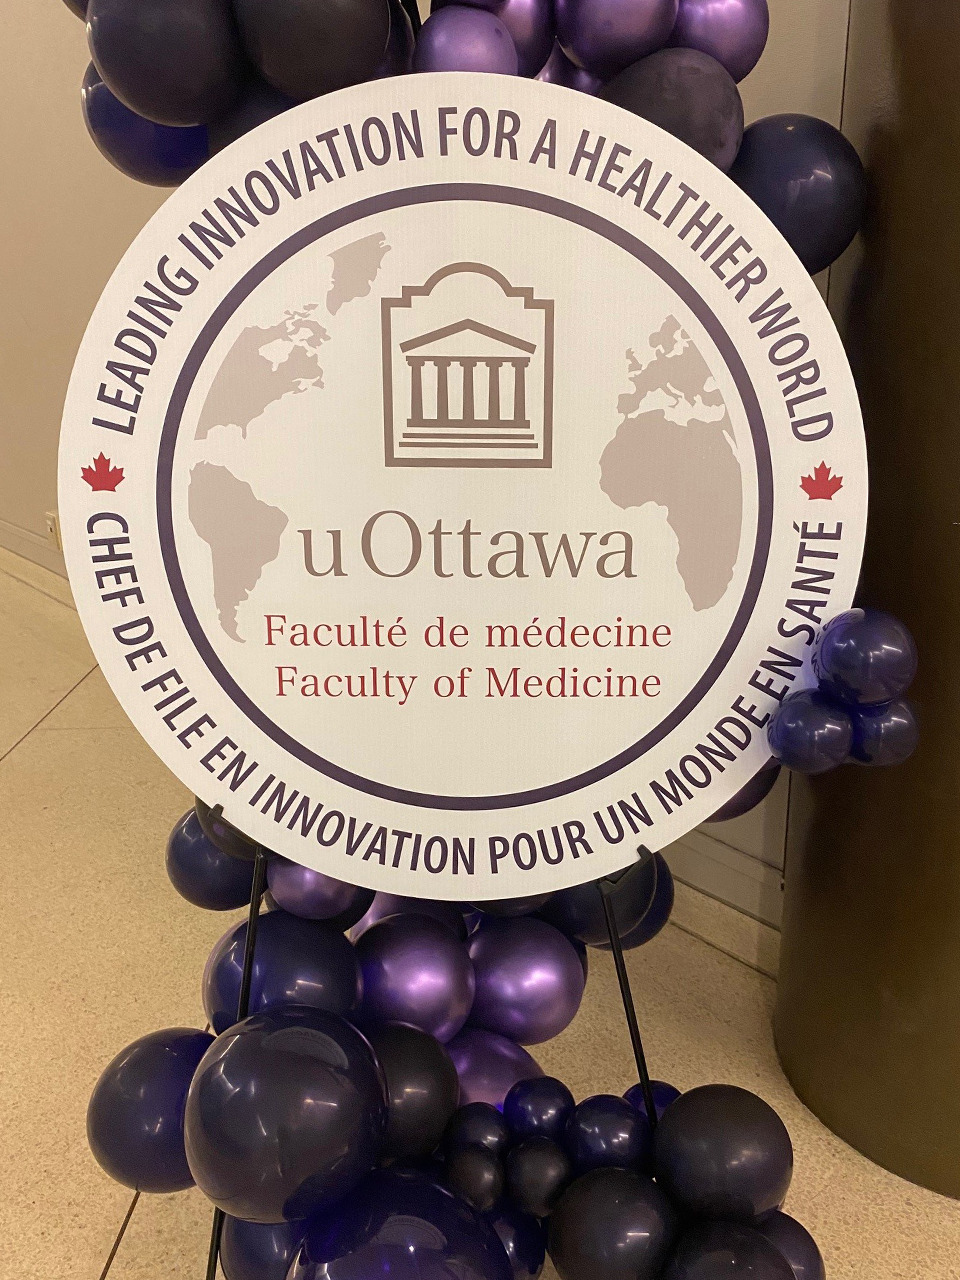 A poster containing the logo of the Faculty of Medicine surrounded by balloons